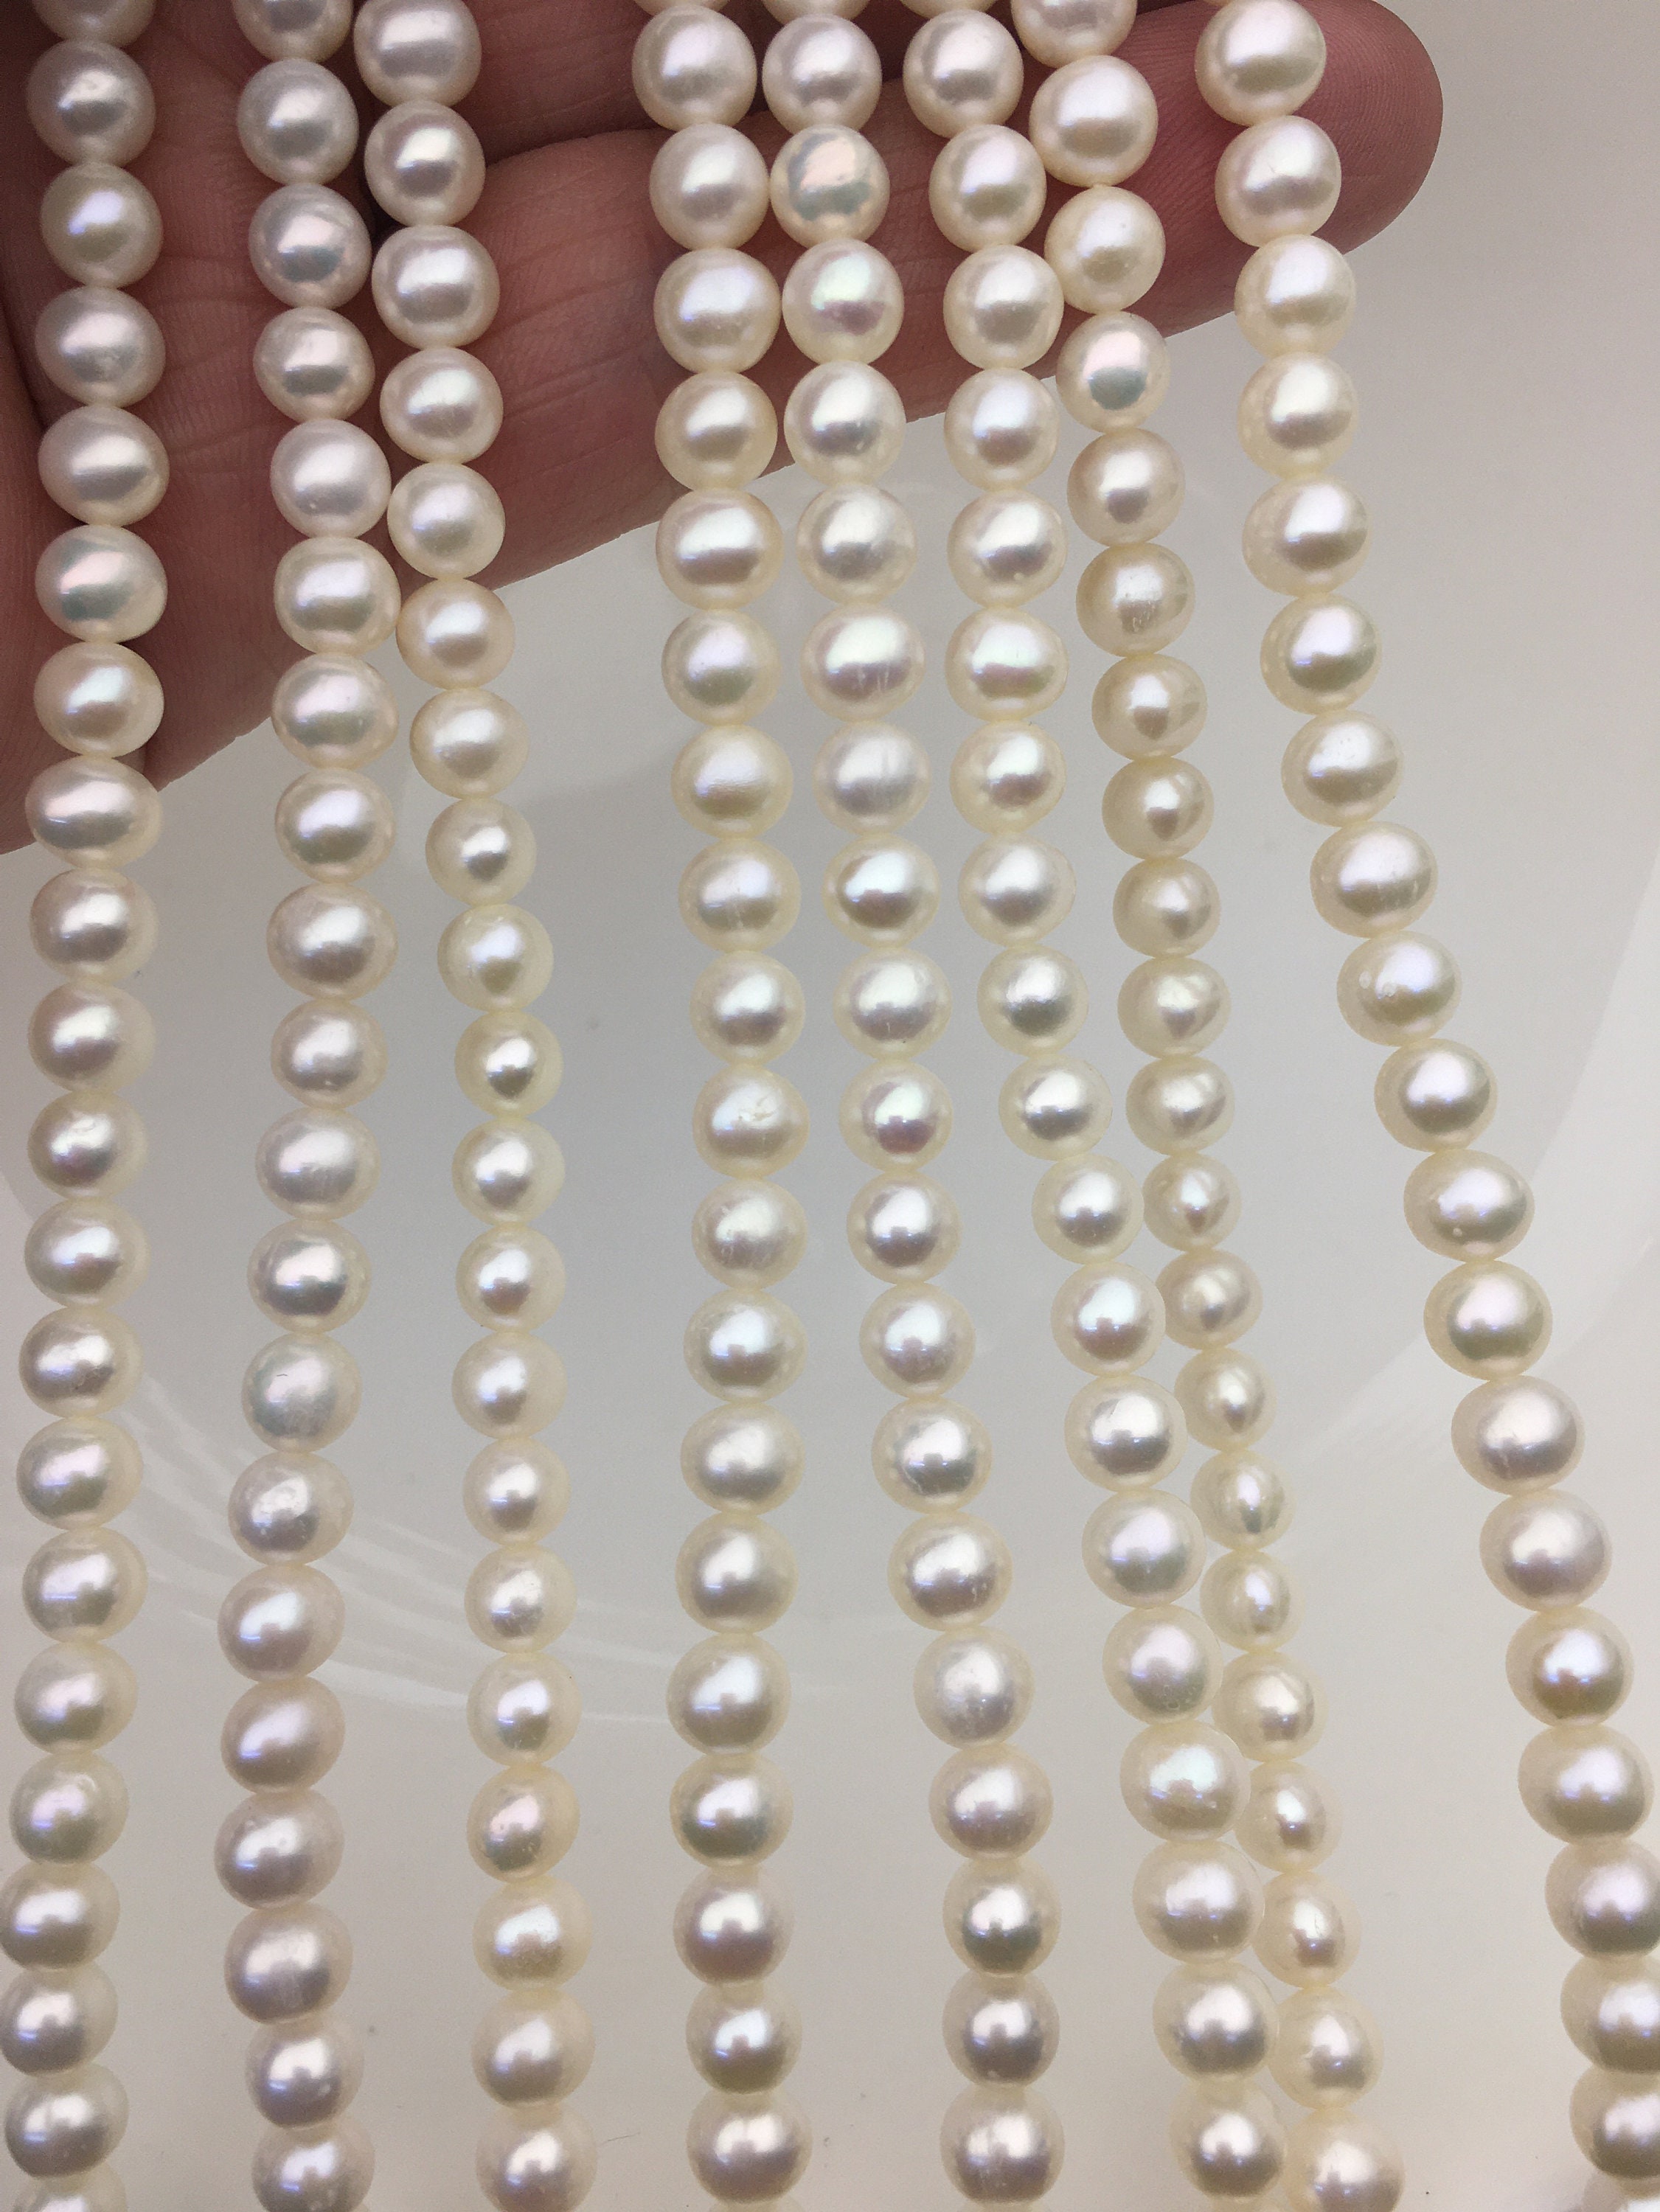 5-5.5mm White Natural Freshwater Pearl Loose Button Flat Back Cabochons 20  pcs